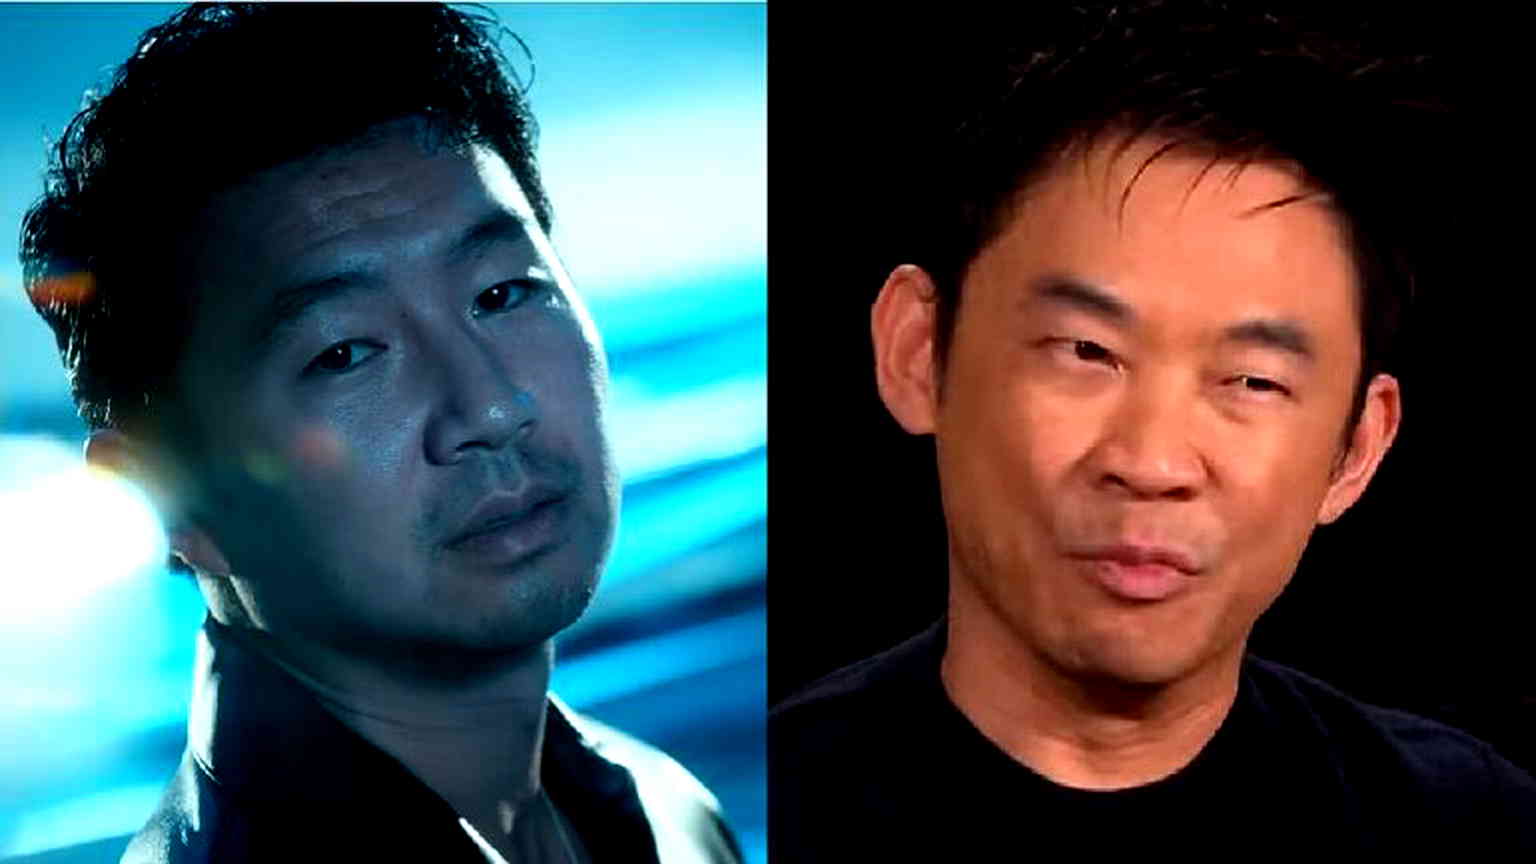 Simu Liu and James Wan team up for espionage thriller series at Peacock